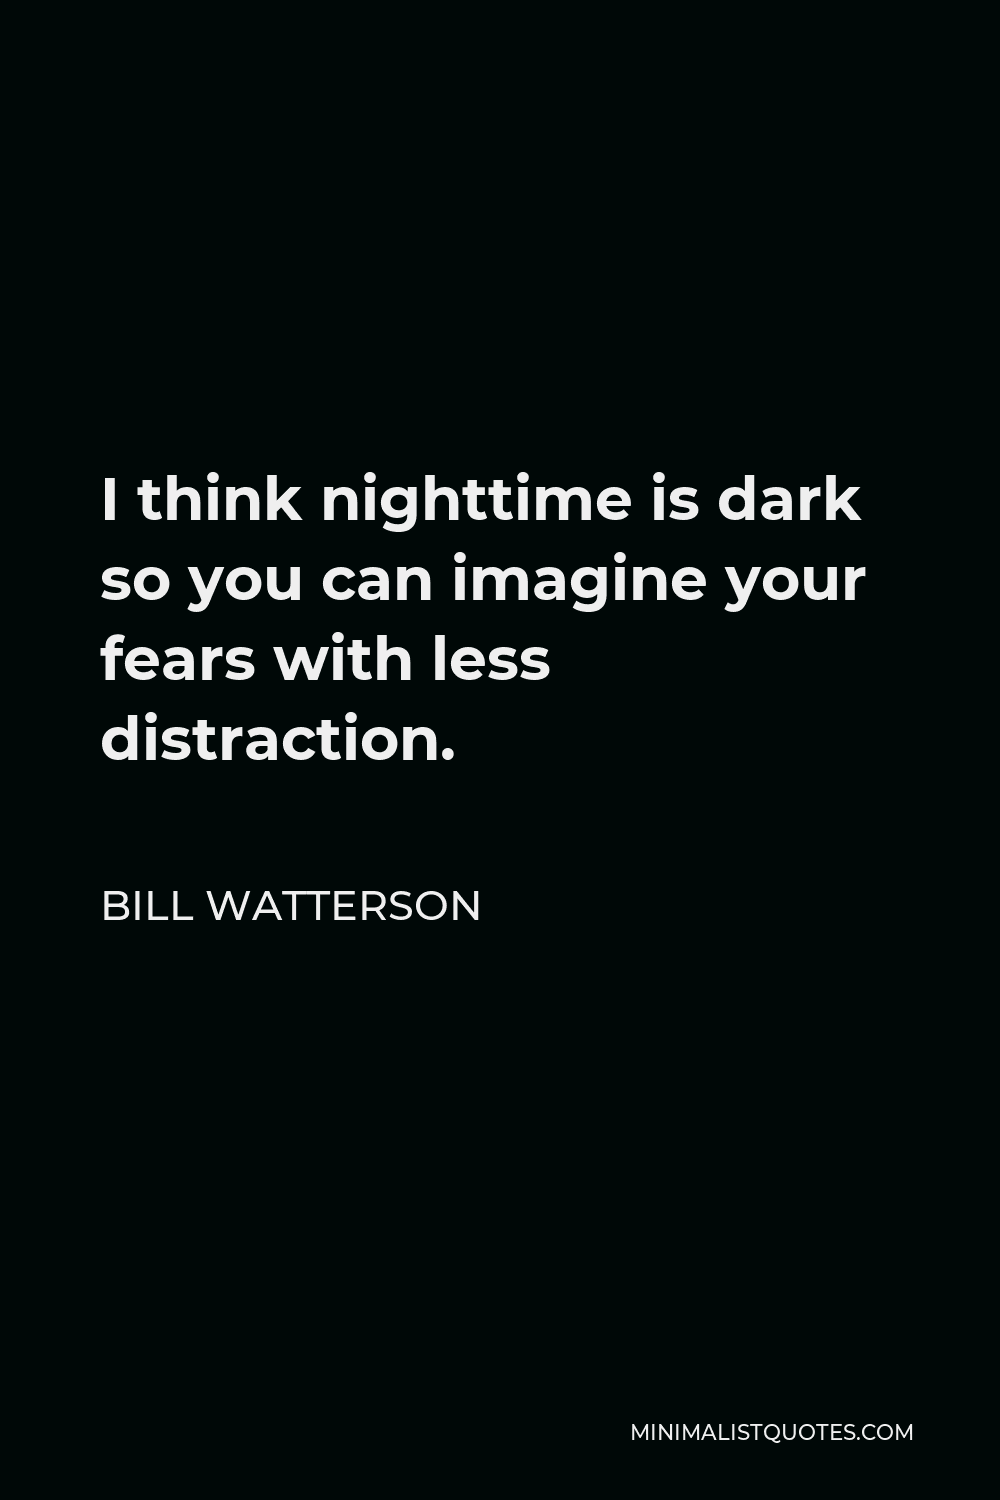 Bill Watterson Quote - I think nighttime is dark so you can imagine your fears with less distraction.